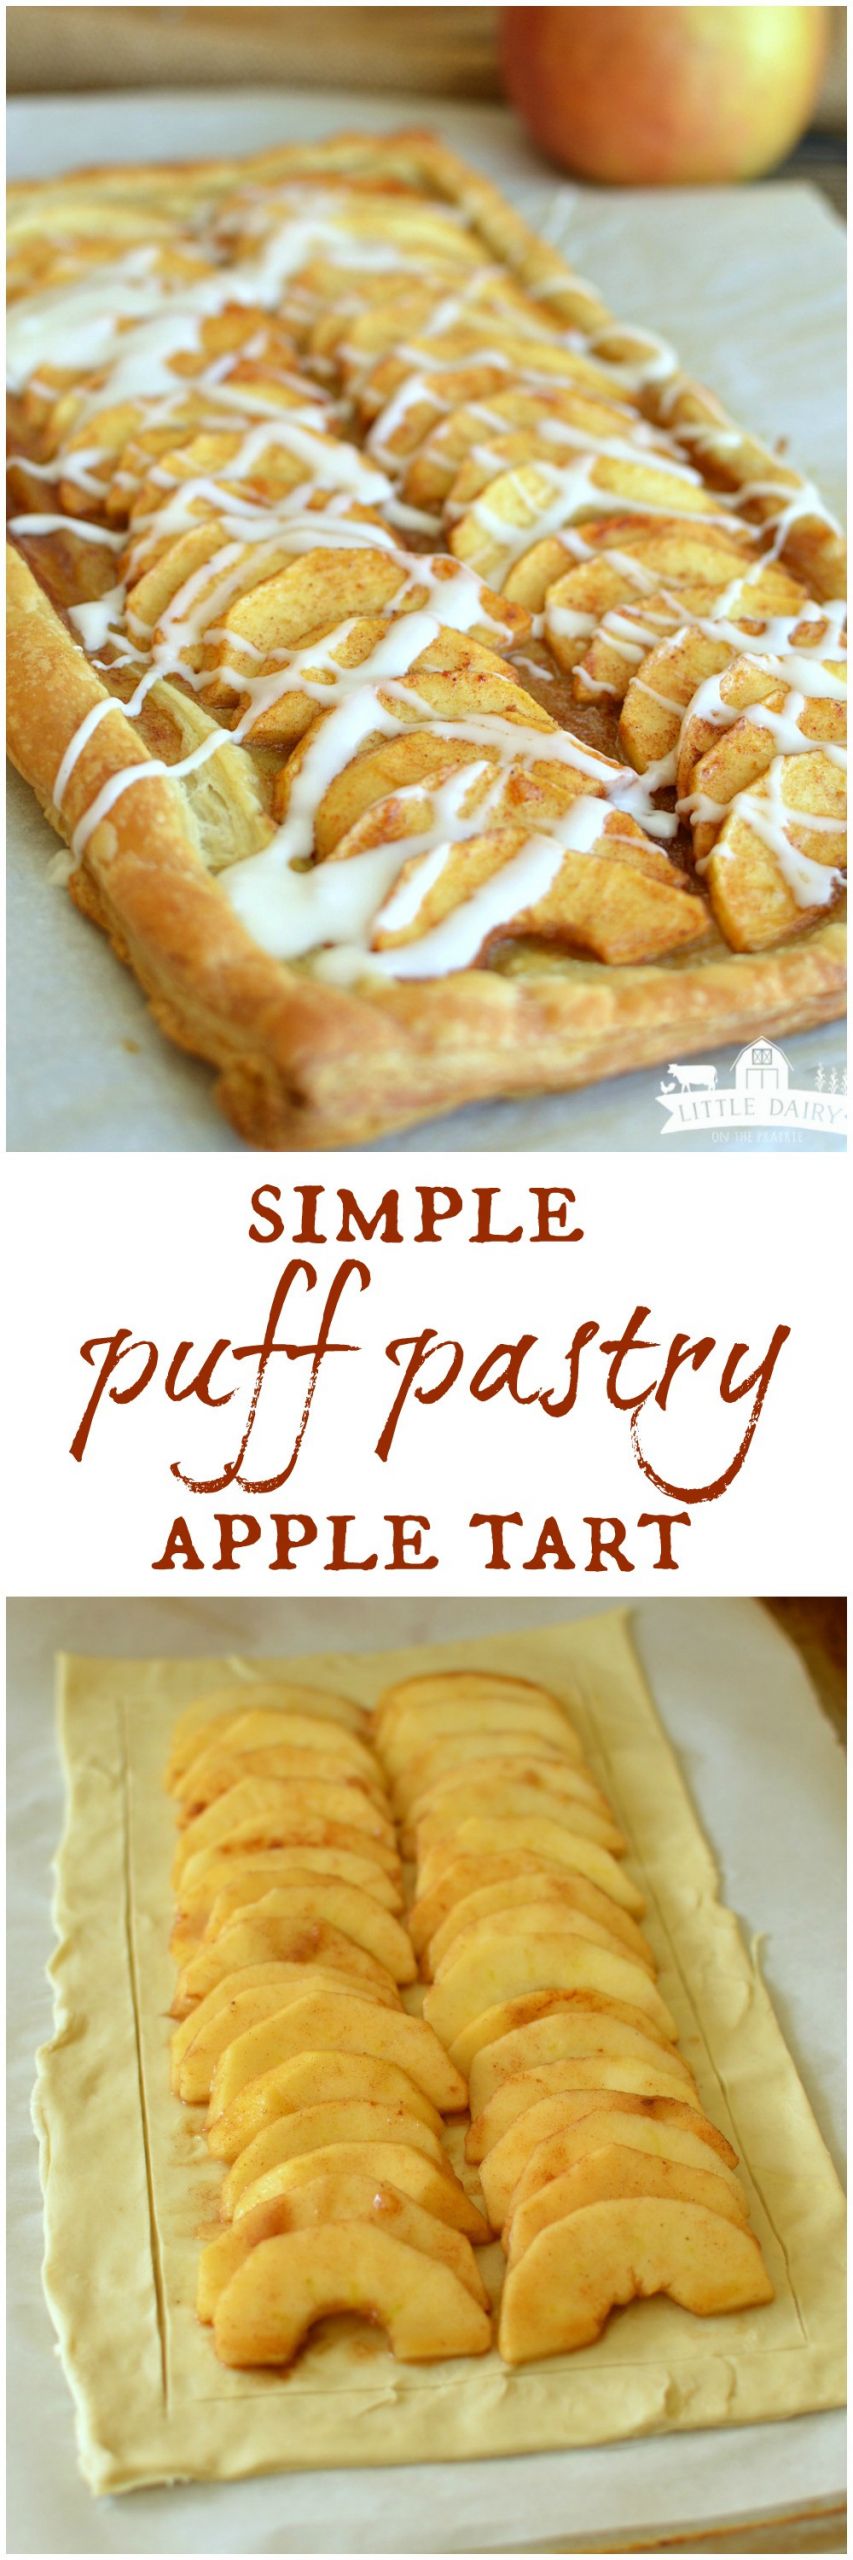 Apple Pie With Puff Pastry
 Simple Puff Pastry Apple Tart Little Dairy the Prairie